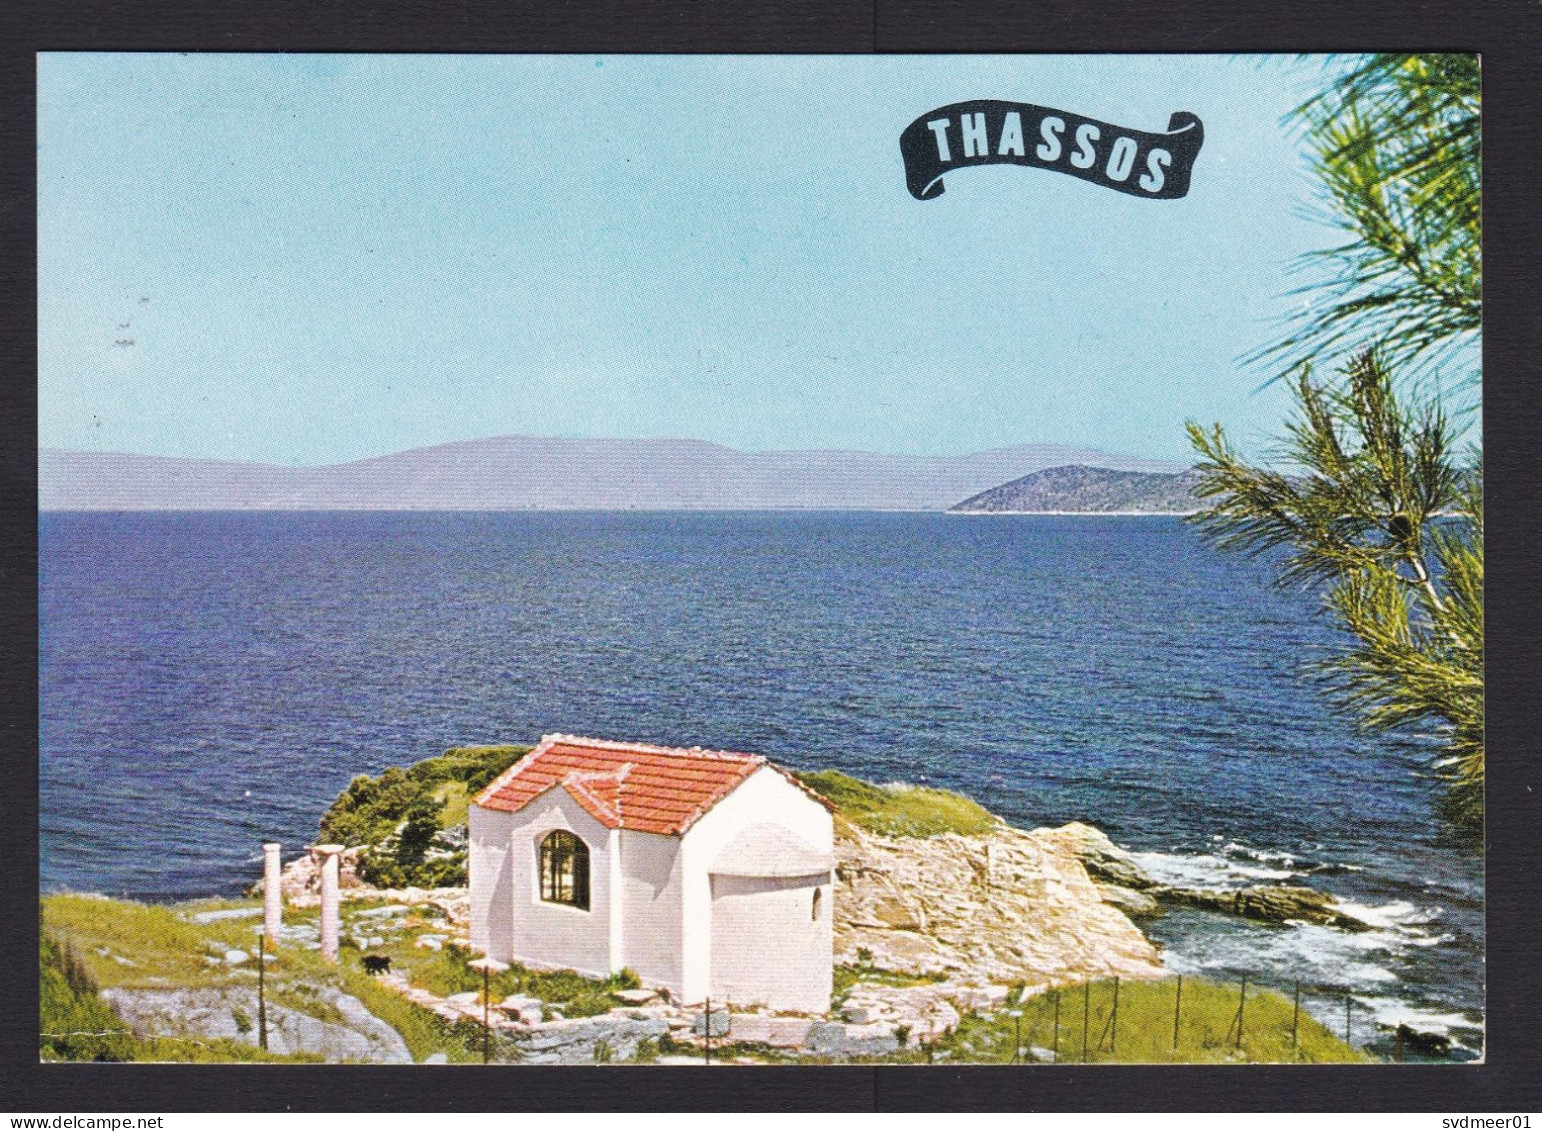 Greece: Picture Postcard To Netherlands, 2000s, 2 Stamps, Firefighter Airplane, Fire, Rainbow, Thassos (traces Of Use) - Storia Postale